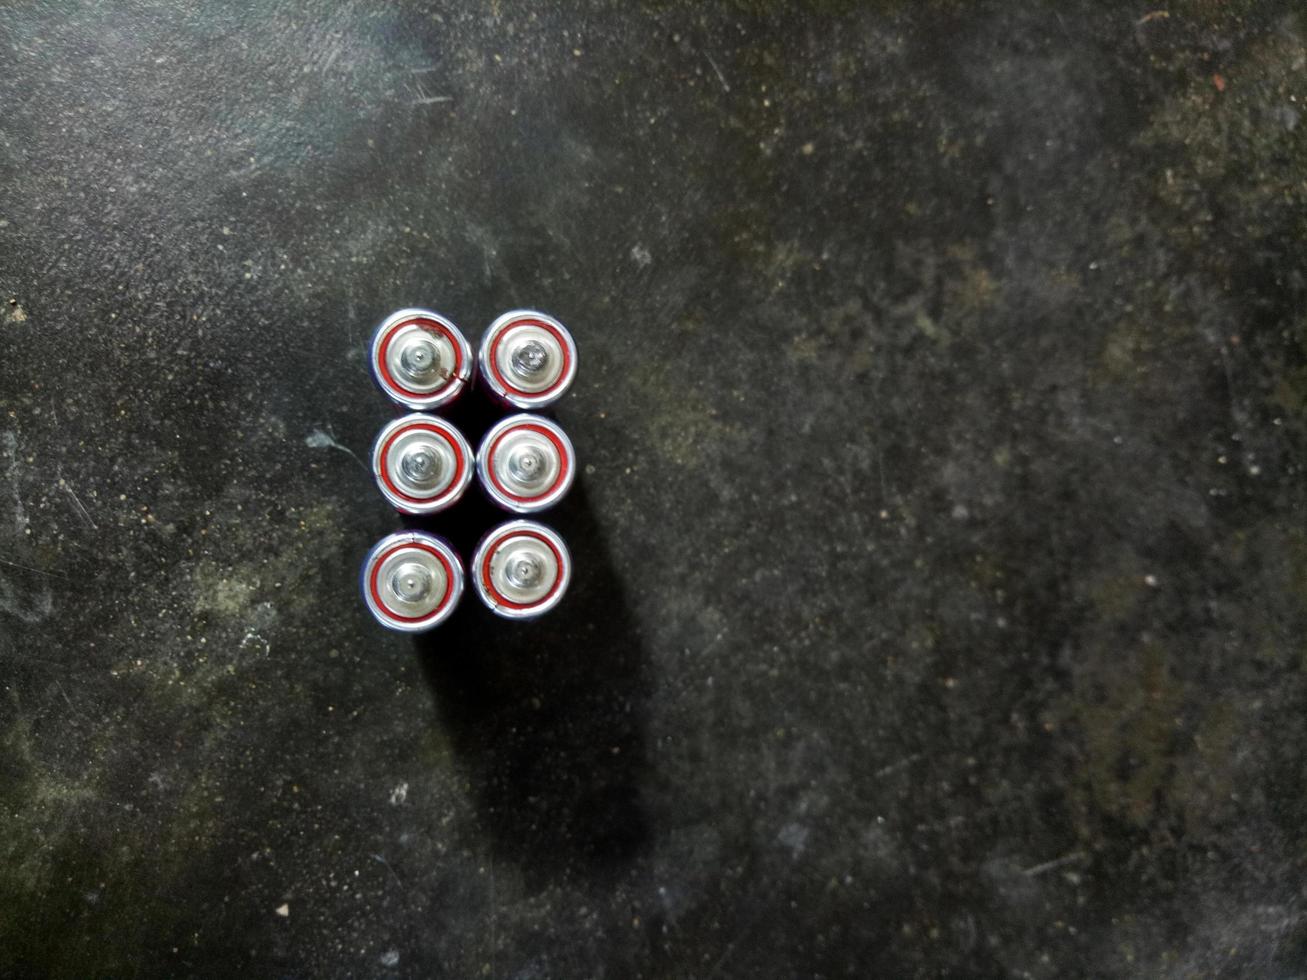 batteries lined up against a cement floor background. photo